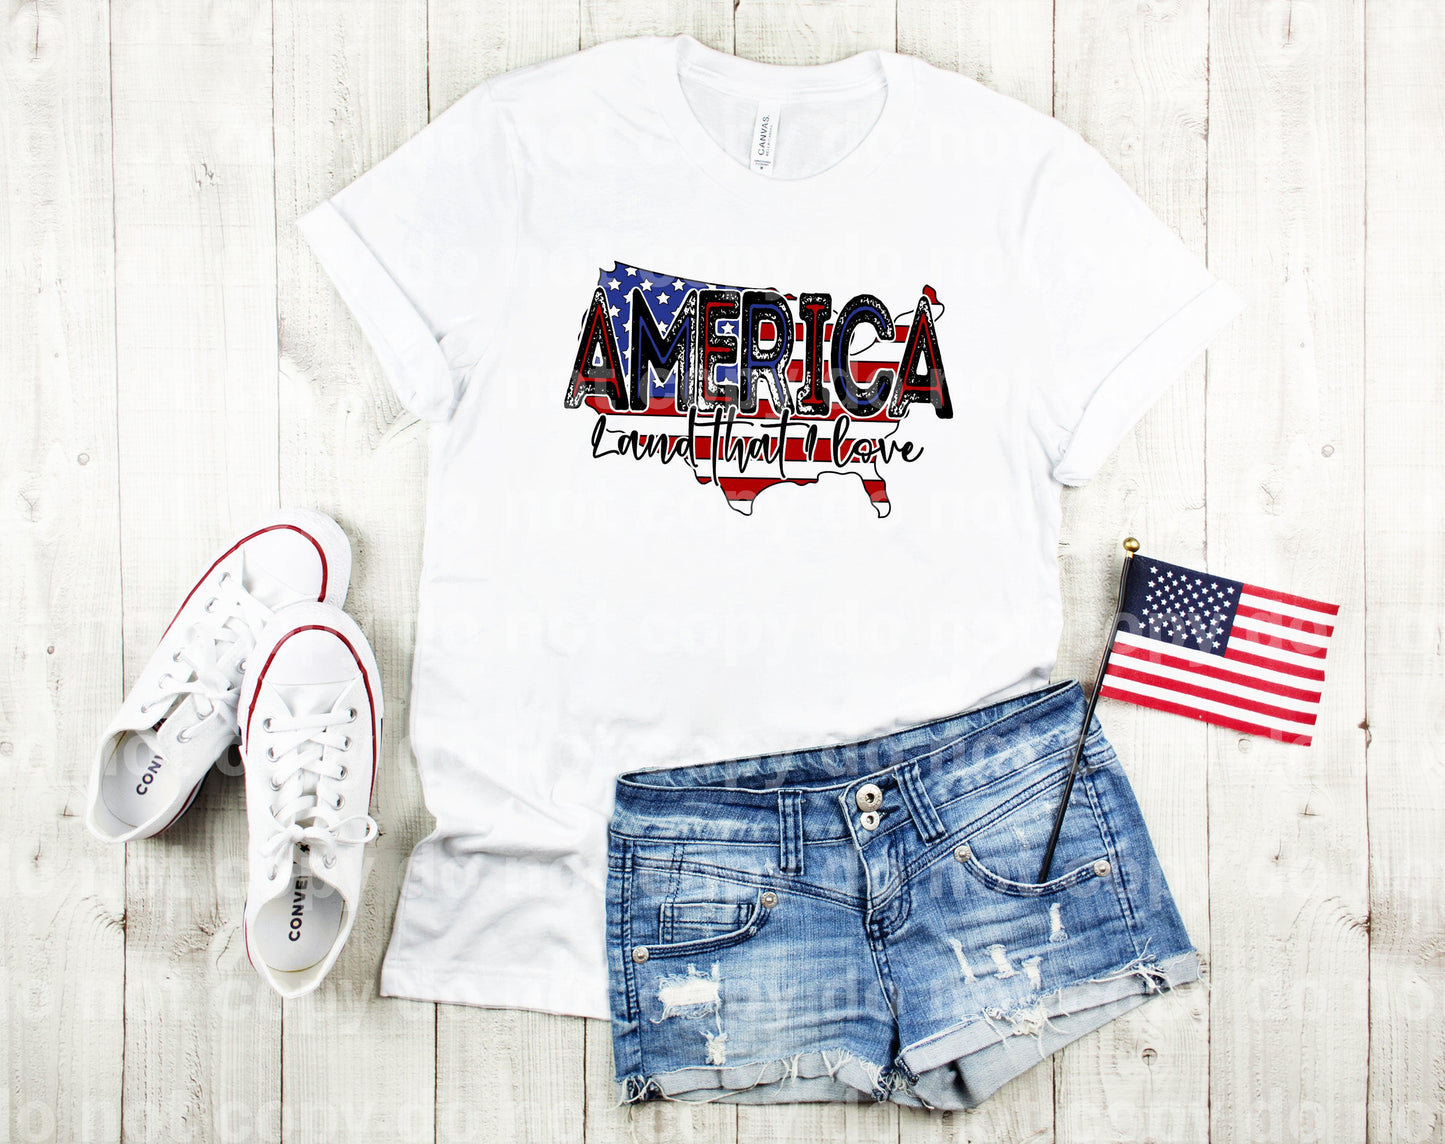 America Land That I Love Dream Print or Sublimation Print